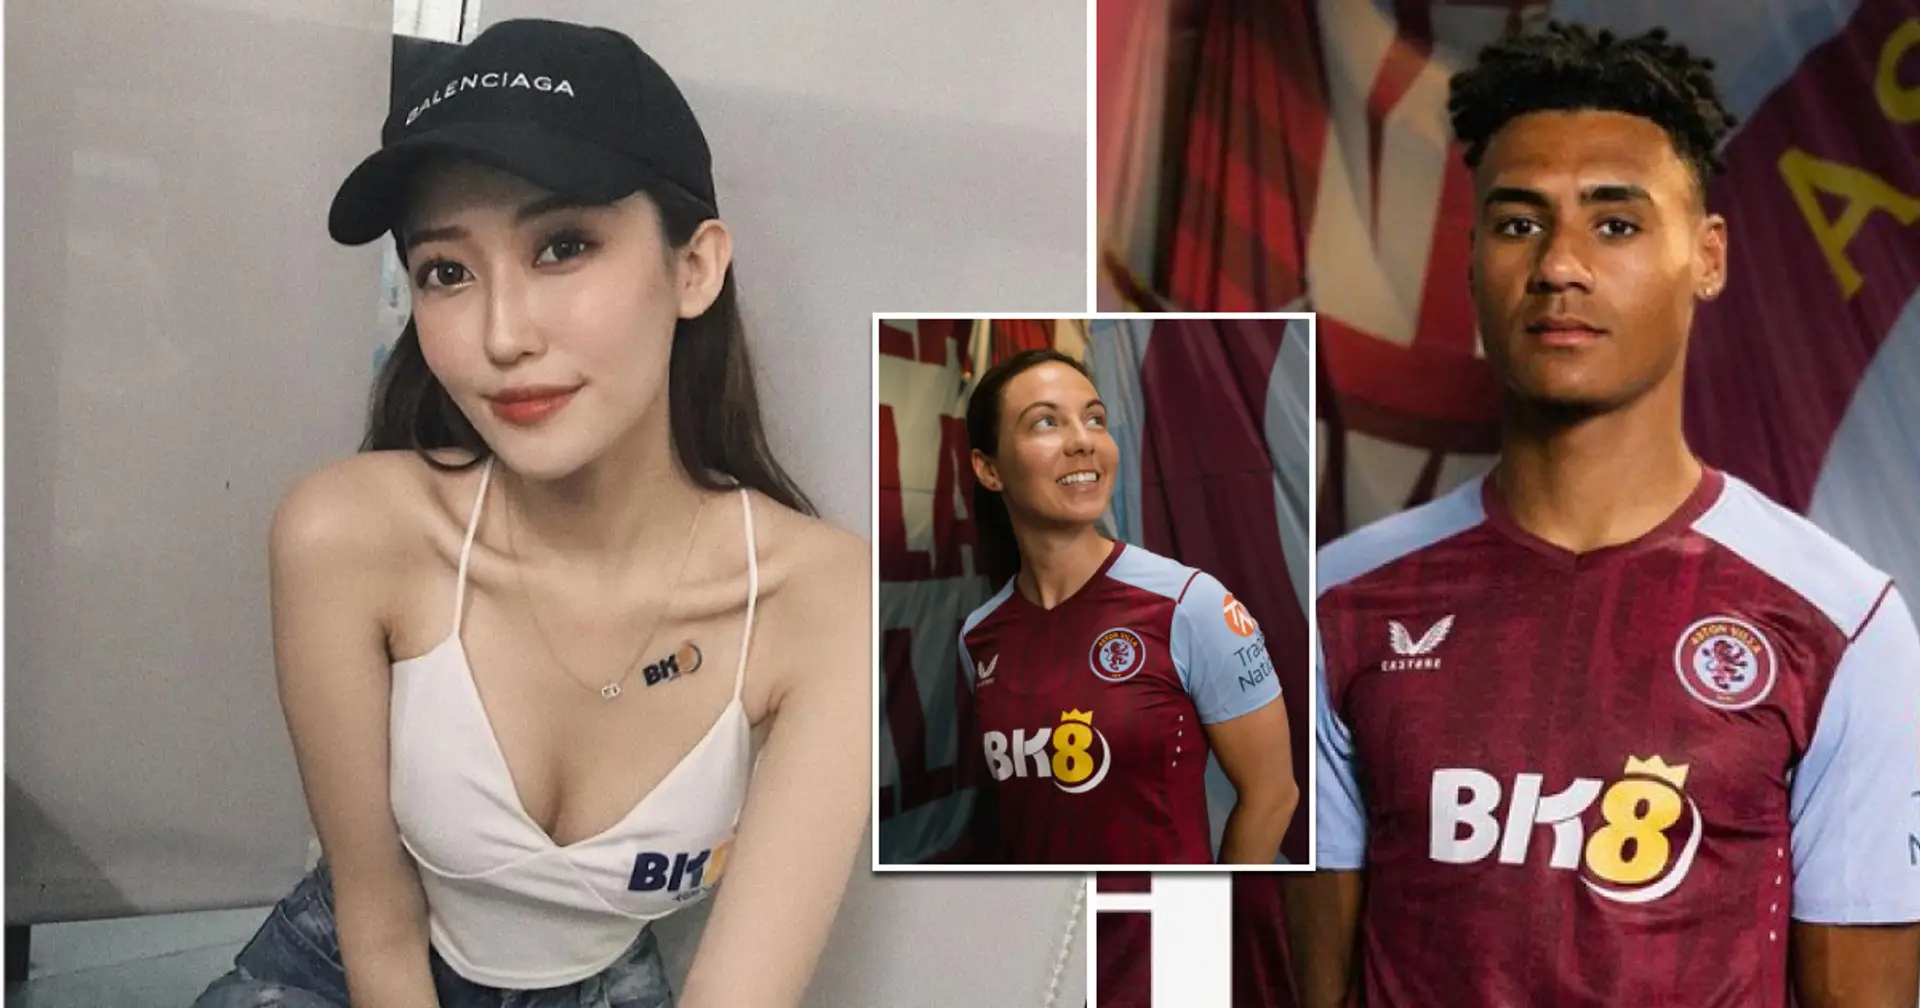 Aston Villa slammed over choice of sponsor known for sexualised adverts